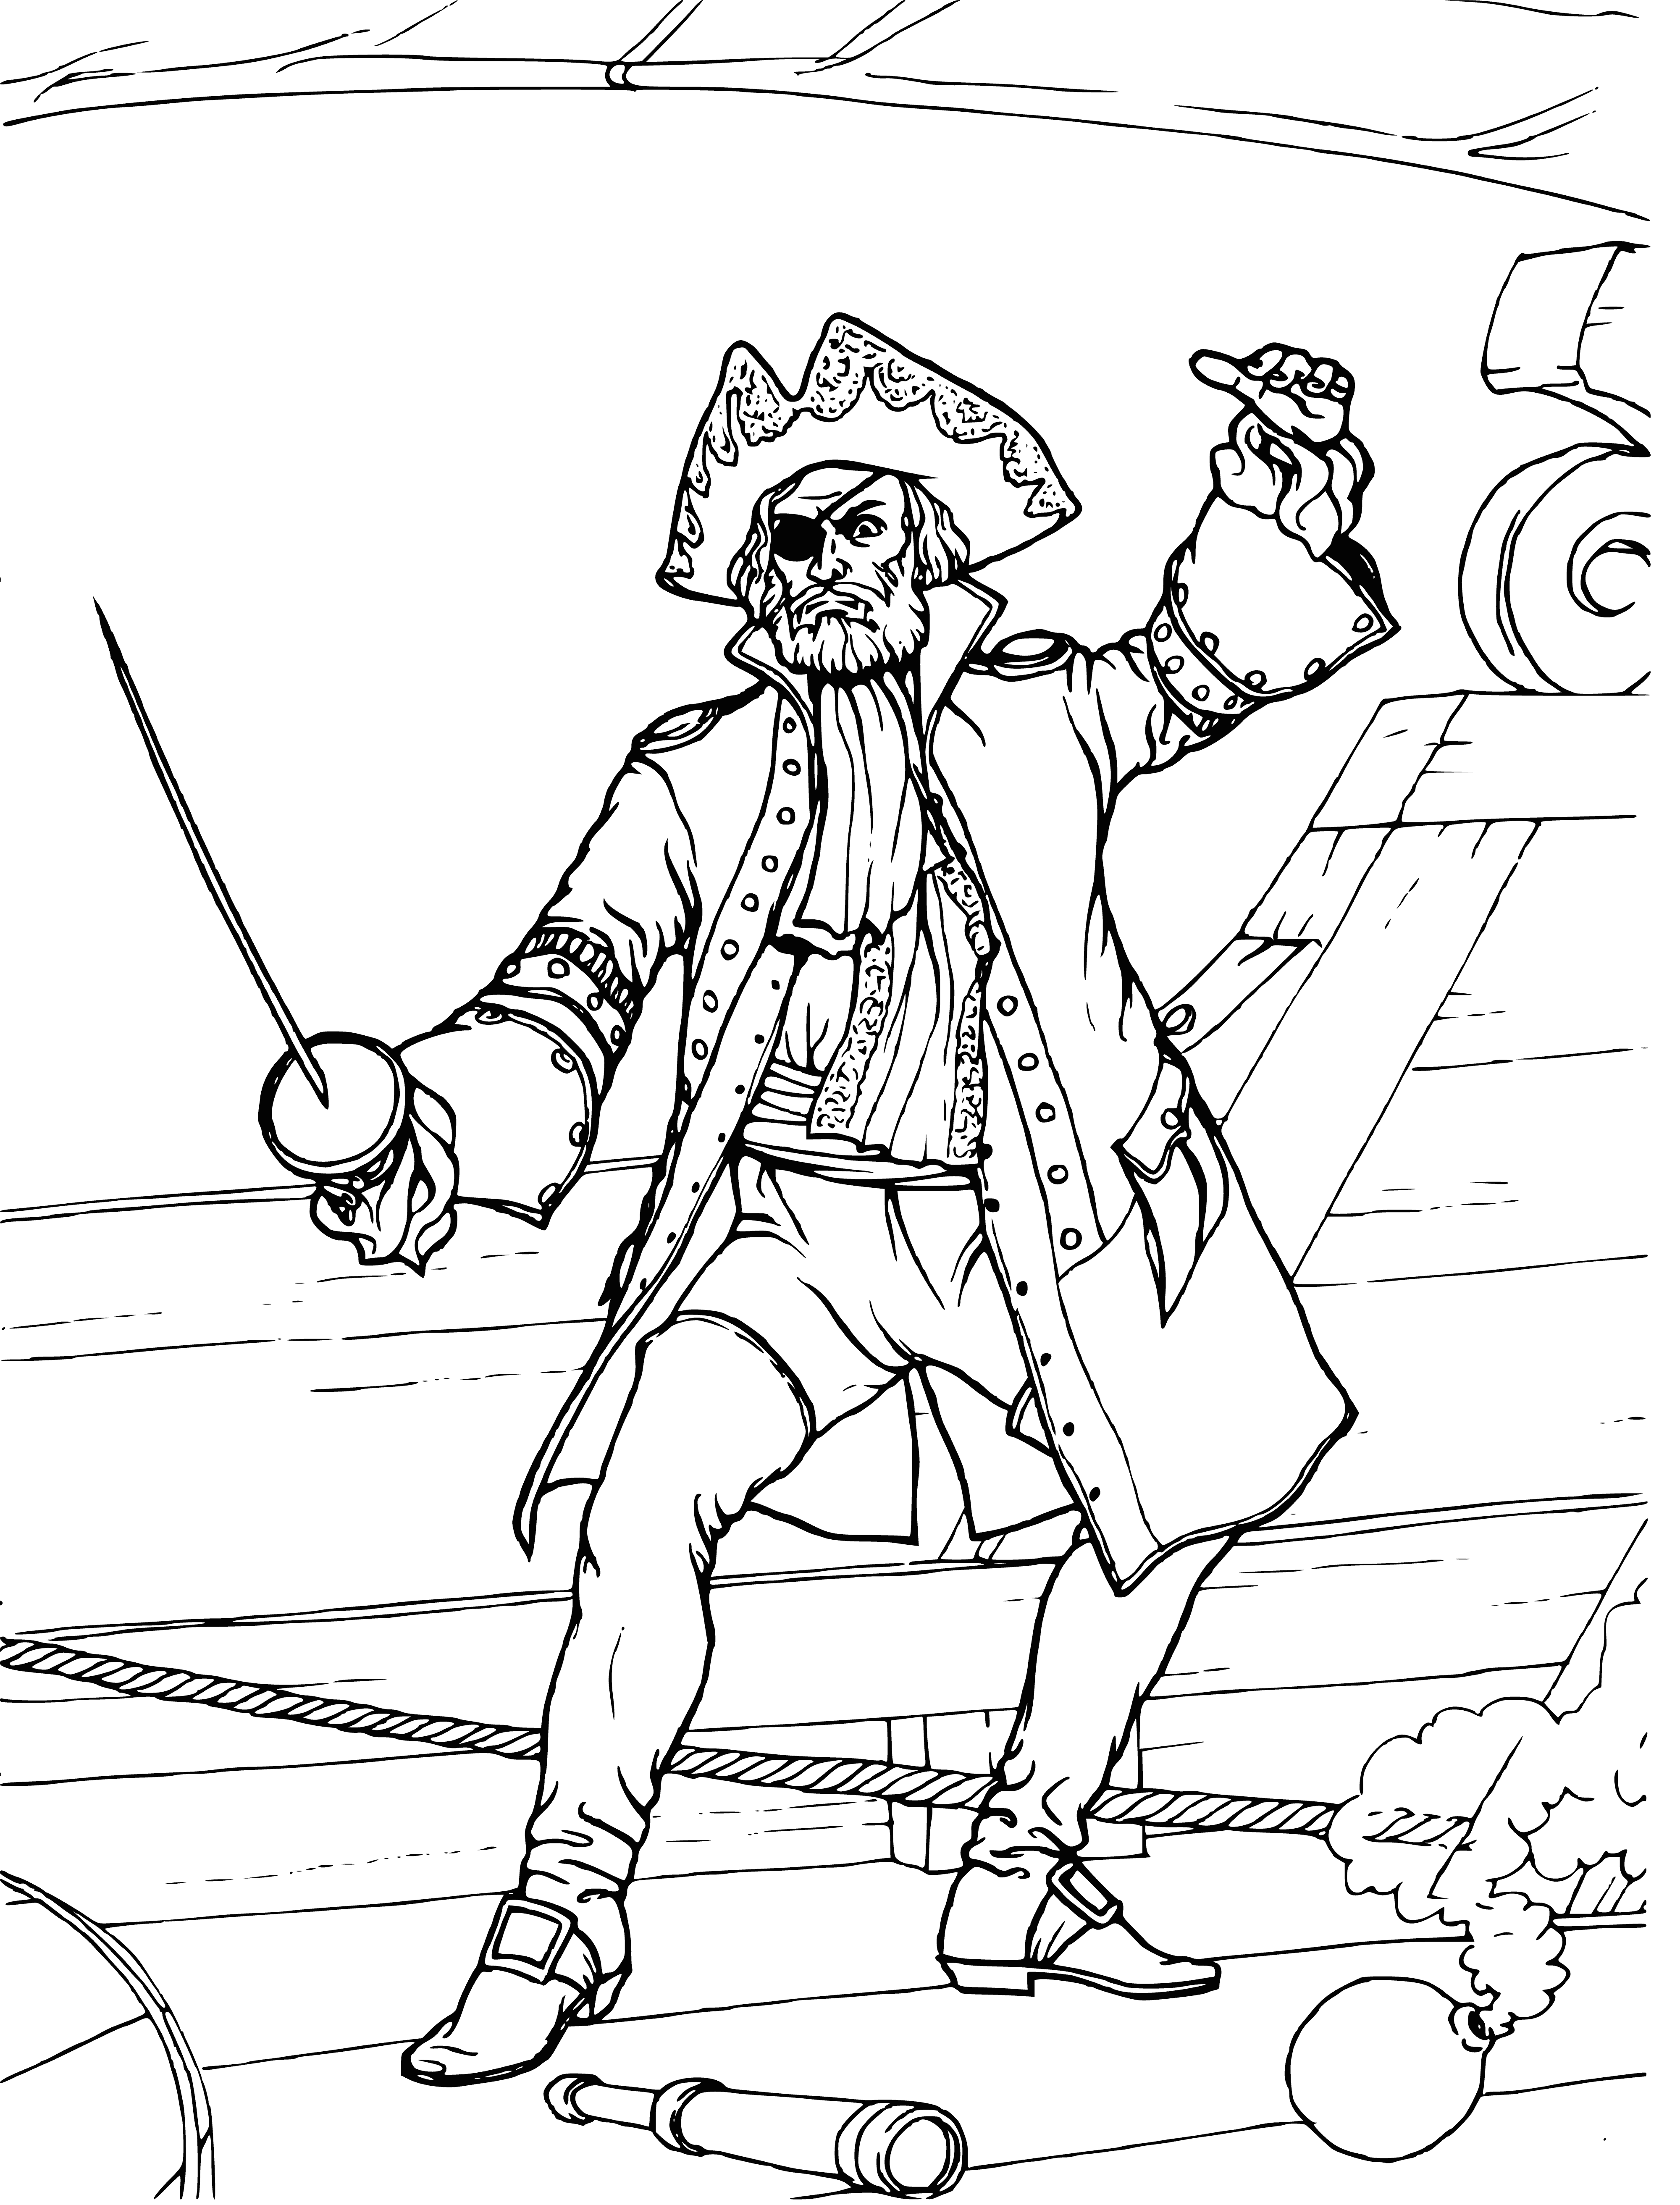 The pirate is fencing coloring page